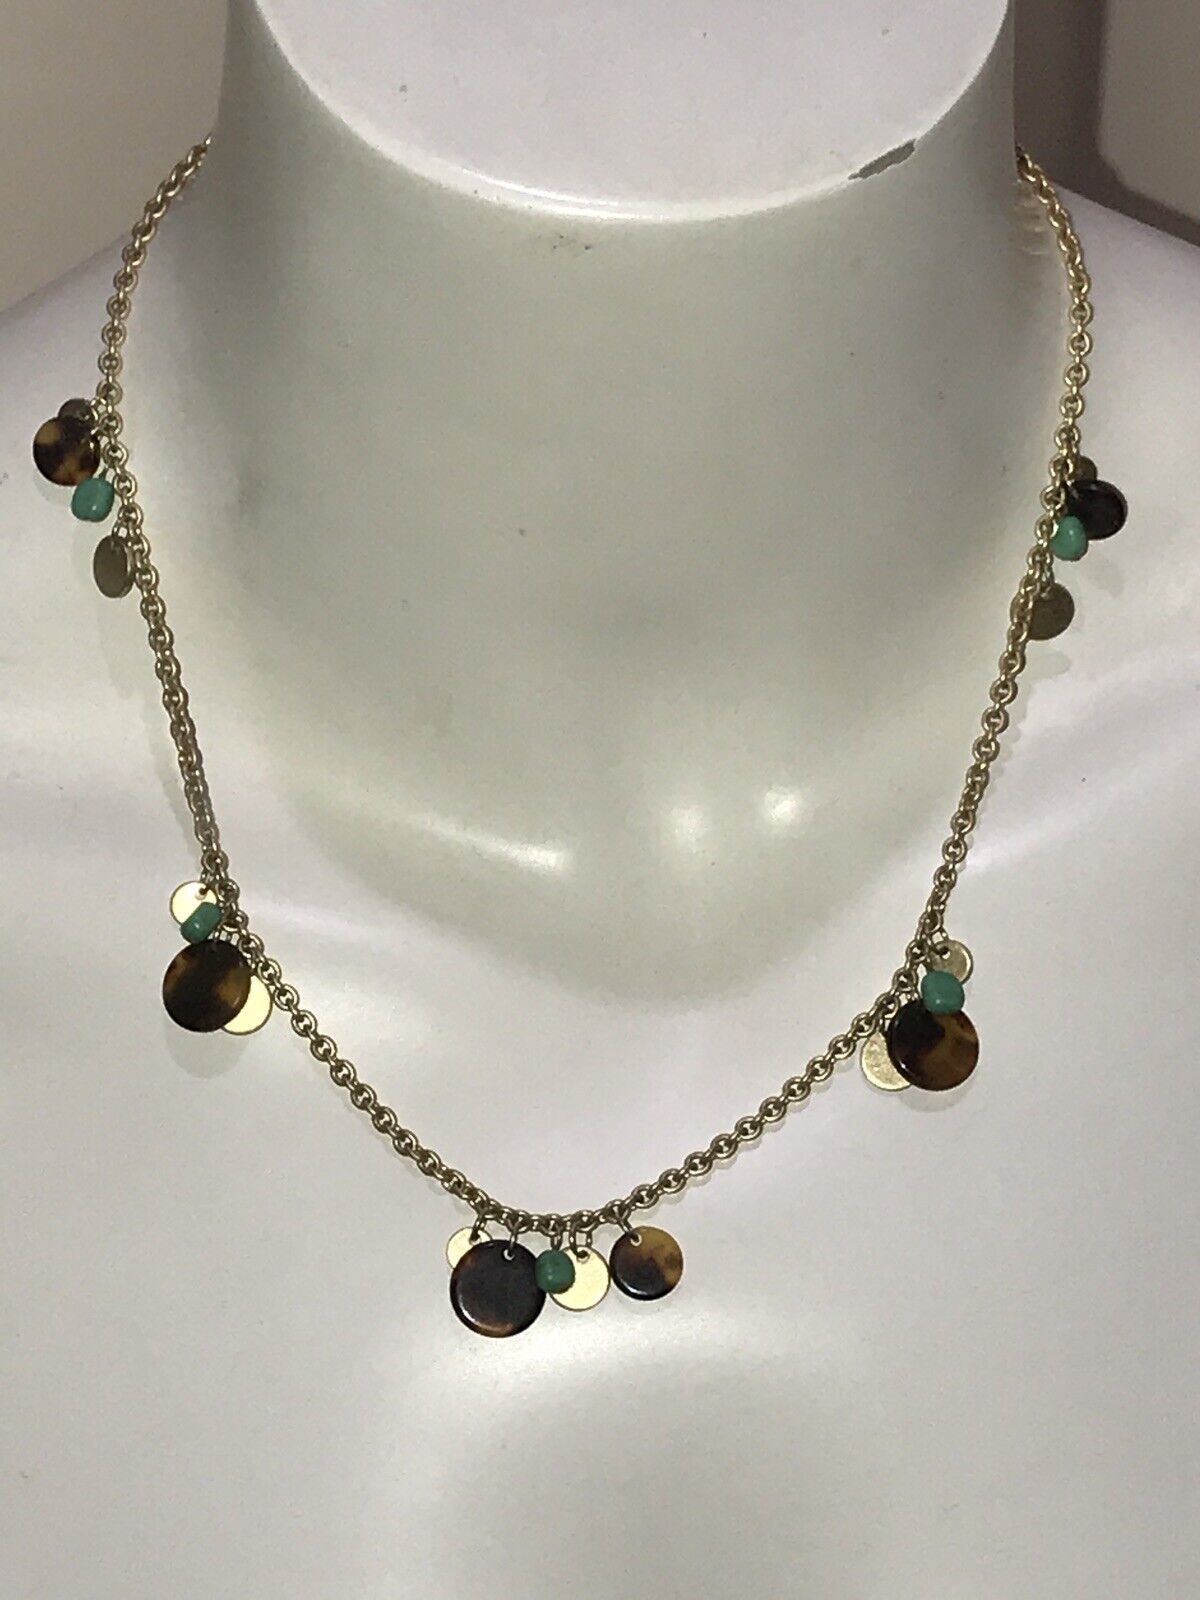 ralph lauren turquoise tortoise Shell Charms  necklace 18” - $20.00